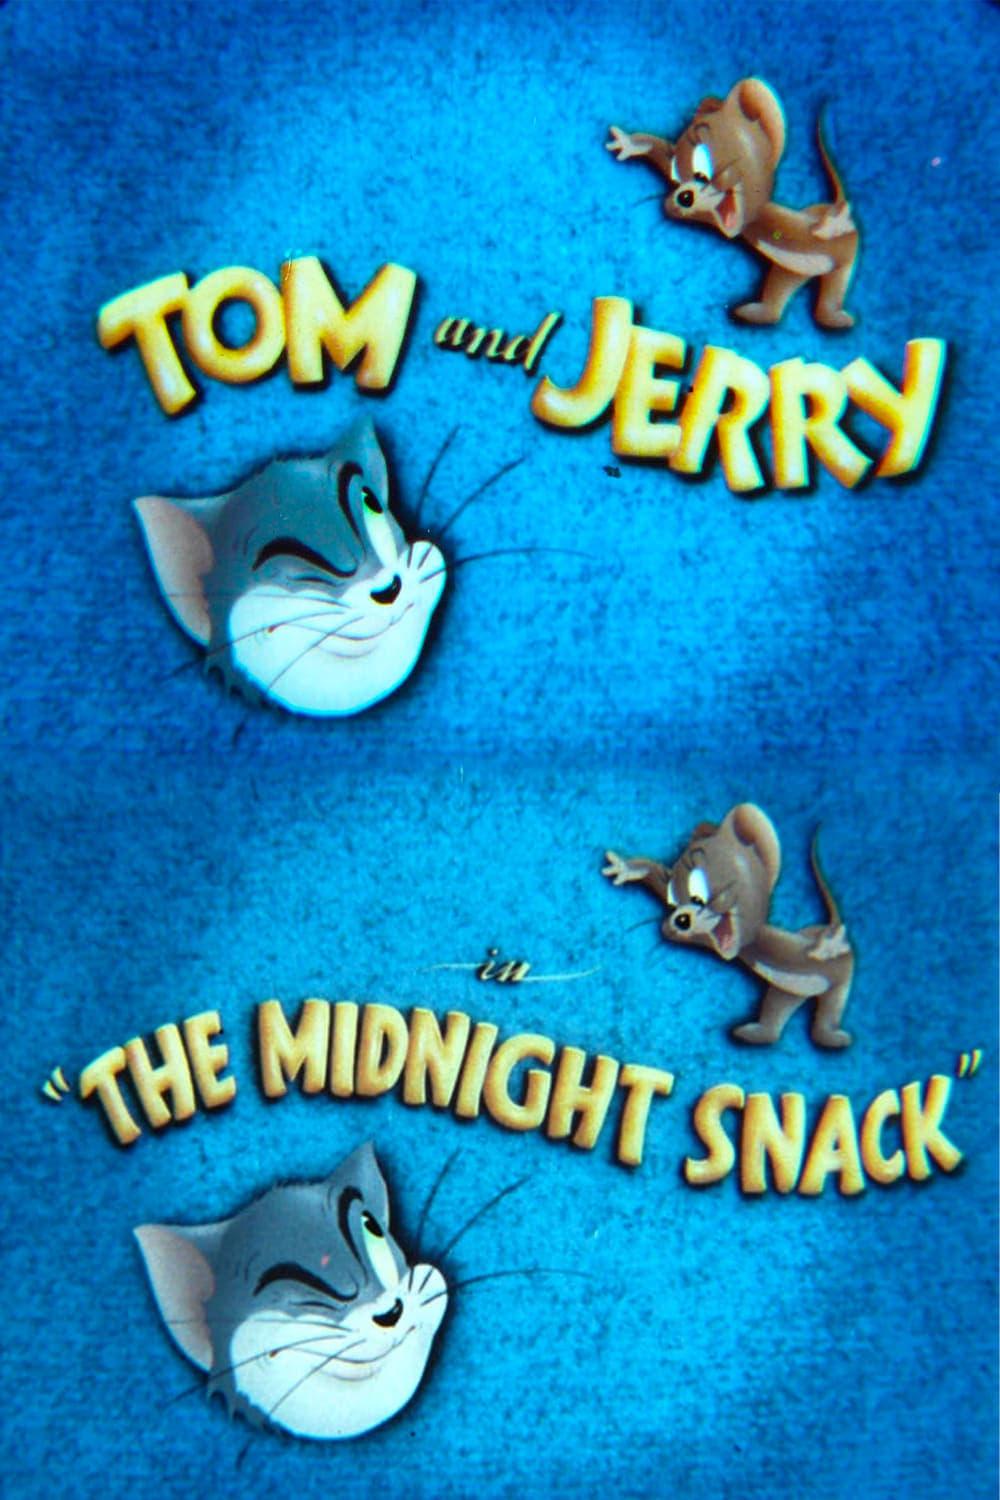 The Midnight Snack poster